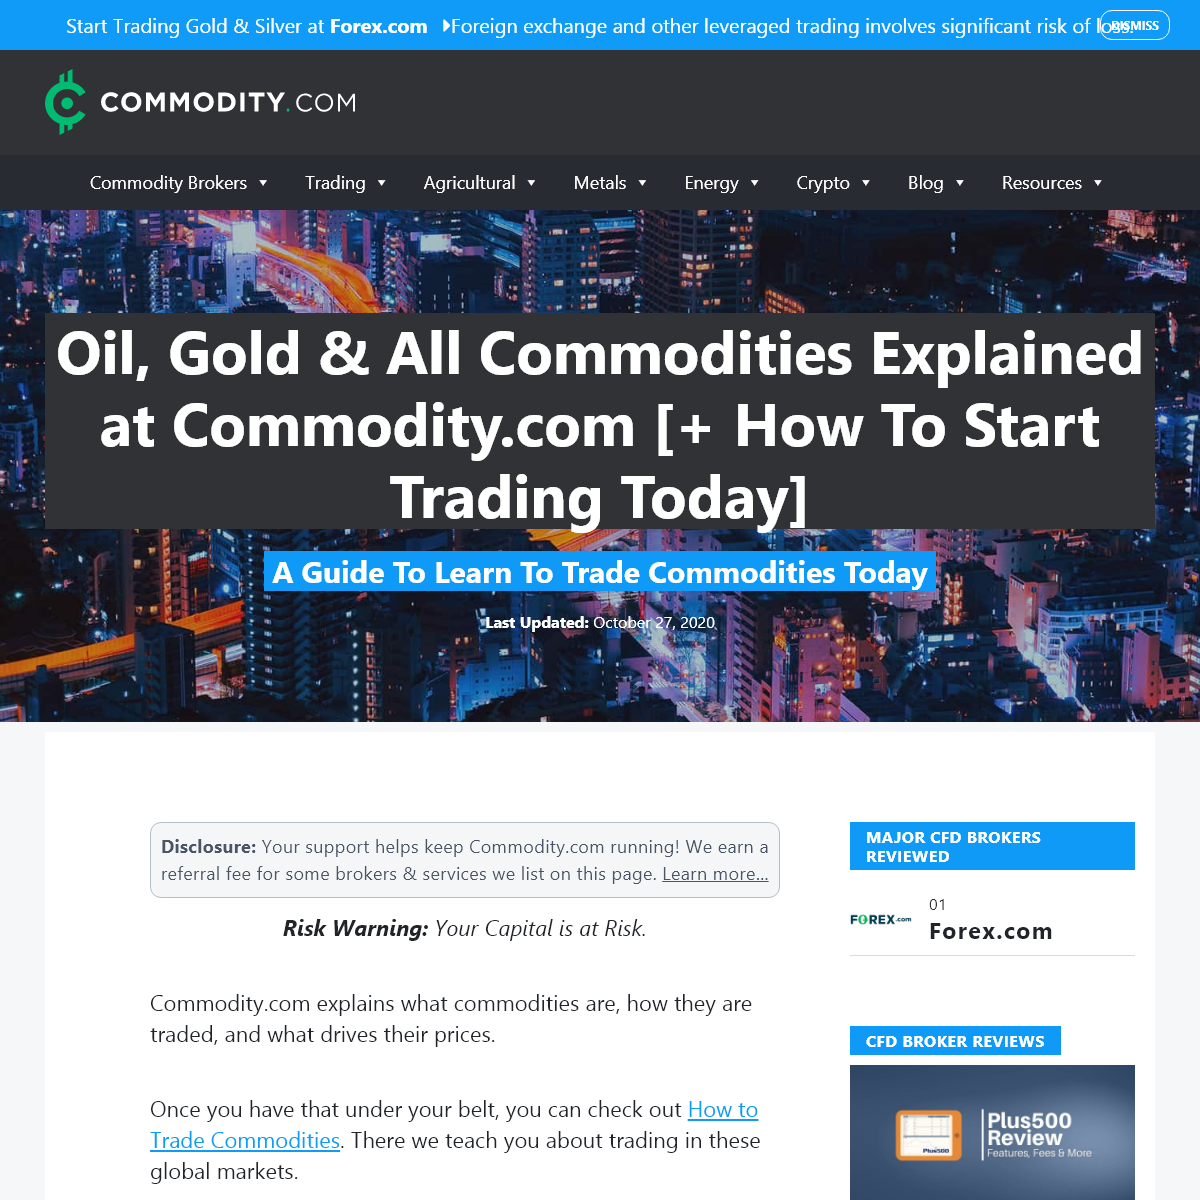 A complete backup of commodity.com